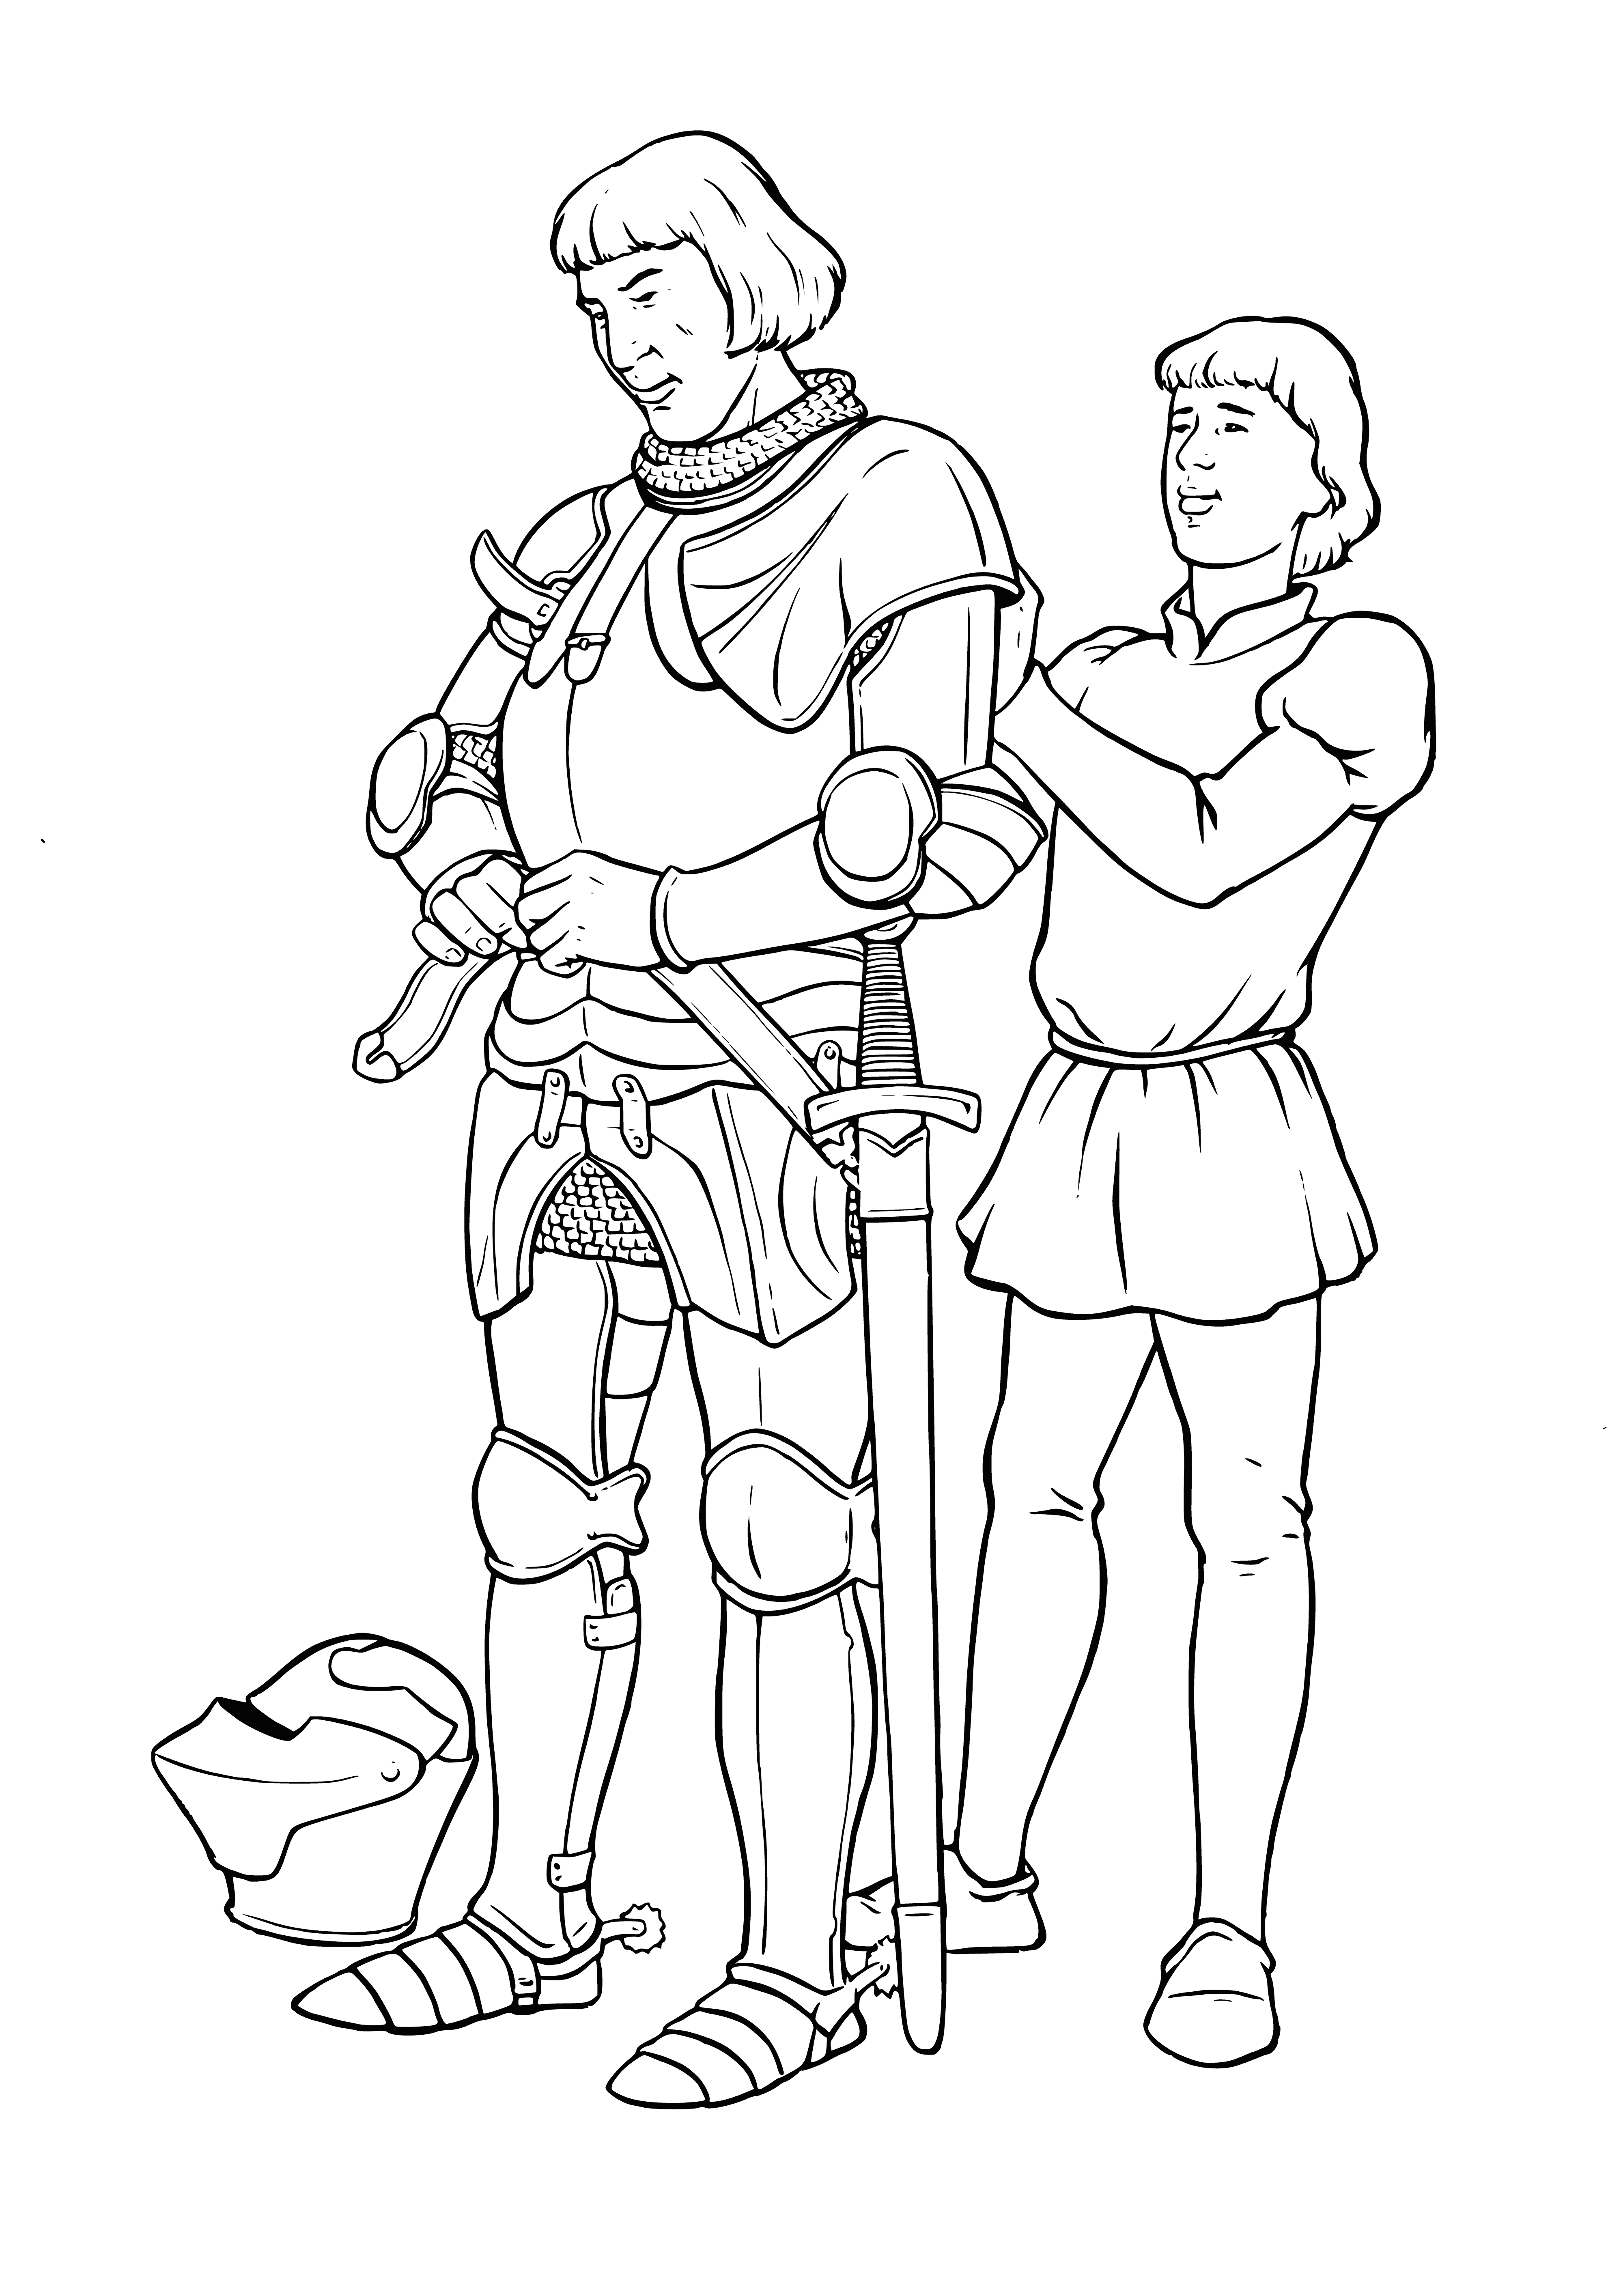 coloring page: Man and boy in armor on horse with swords, shields, and helmets; man has blue cape.